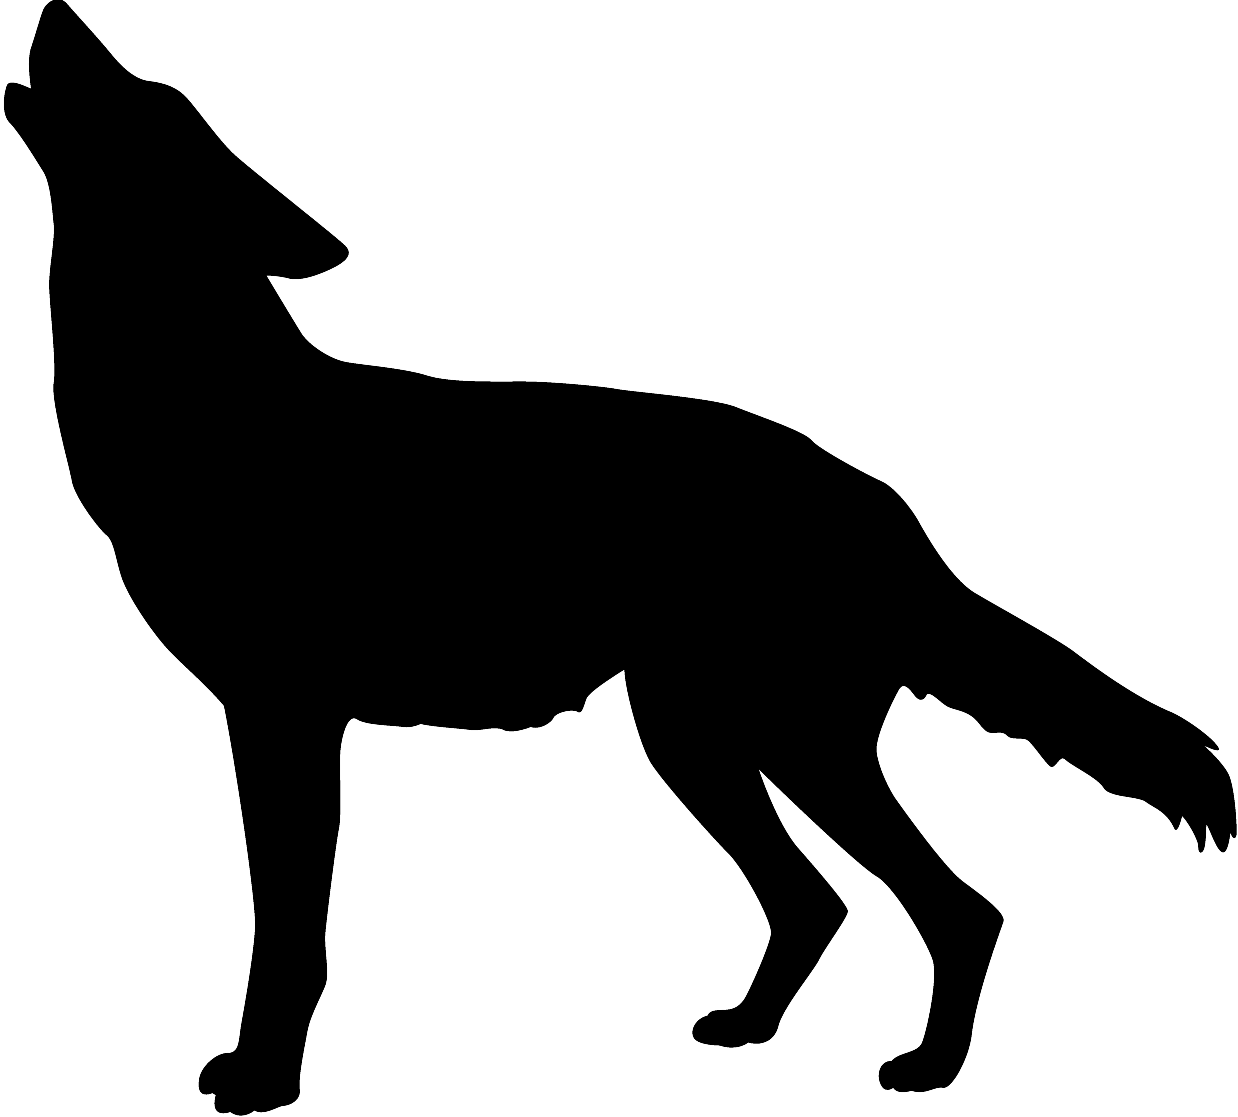 Free Coyote Silhouette Images, Download Free Clip Art, Free